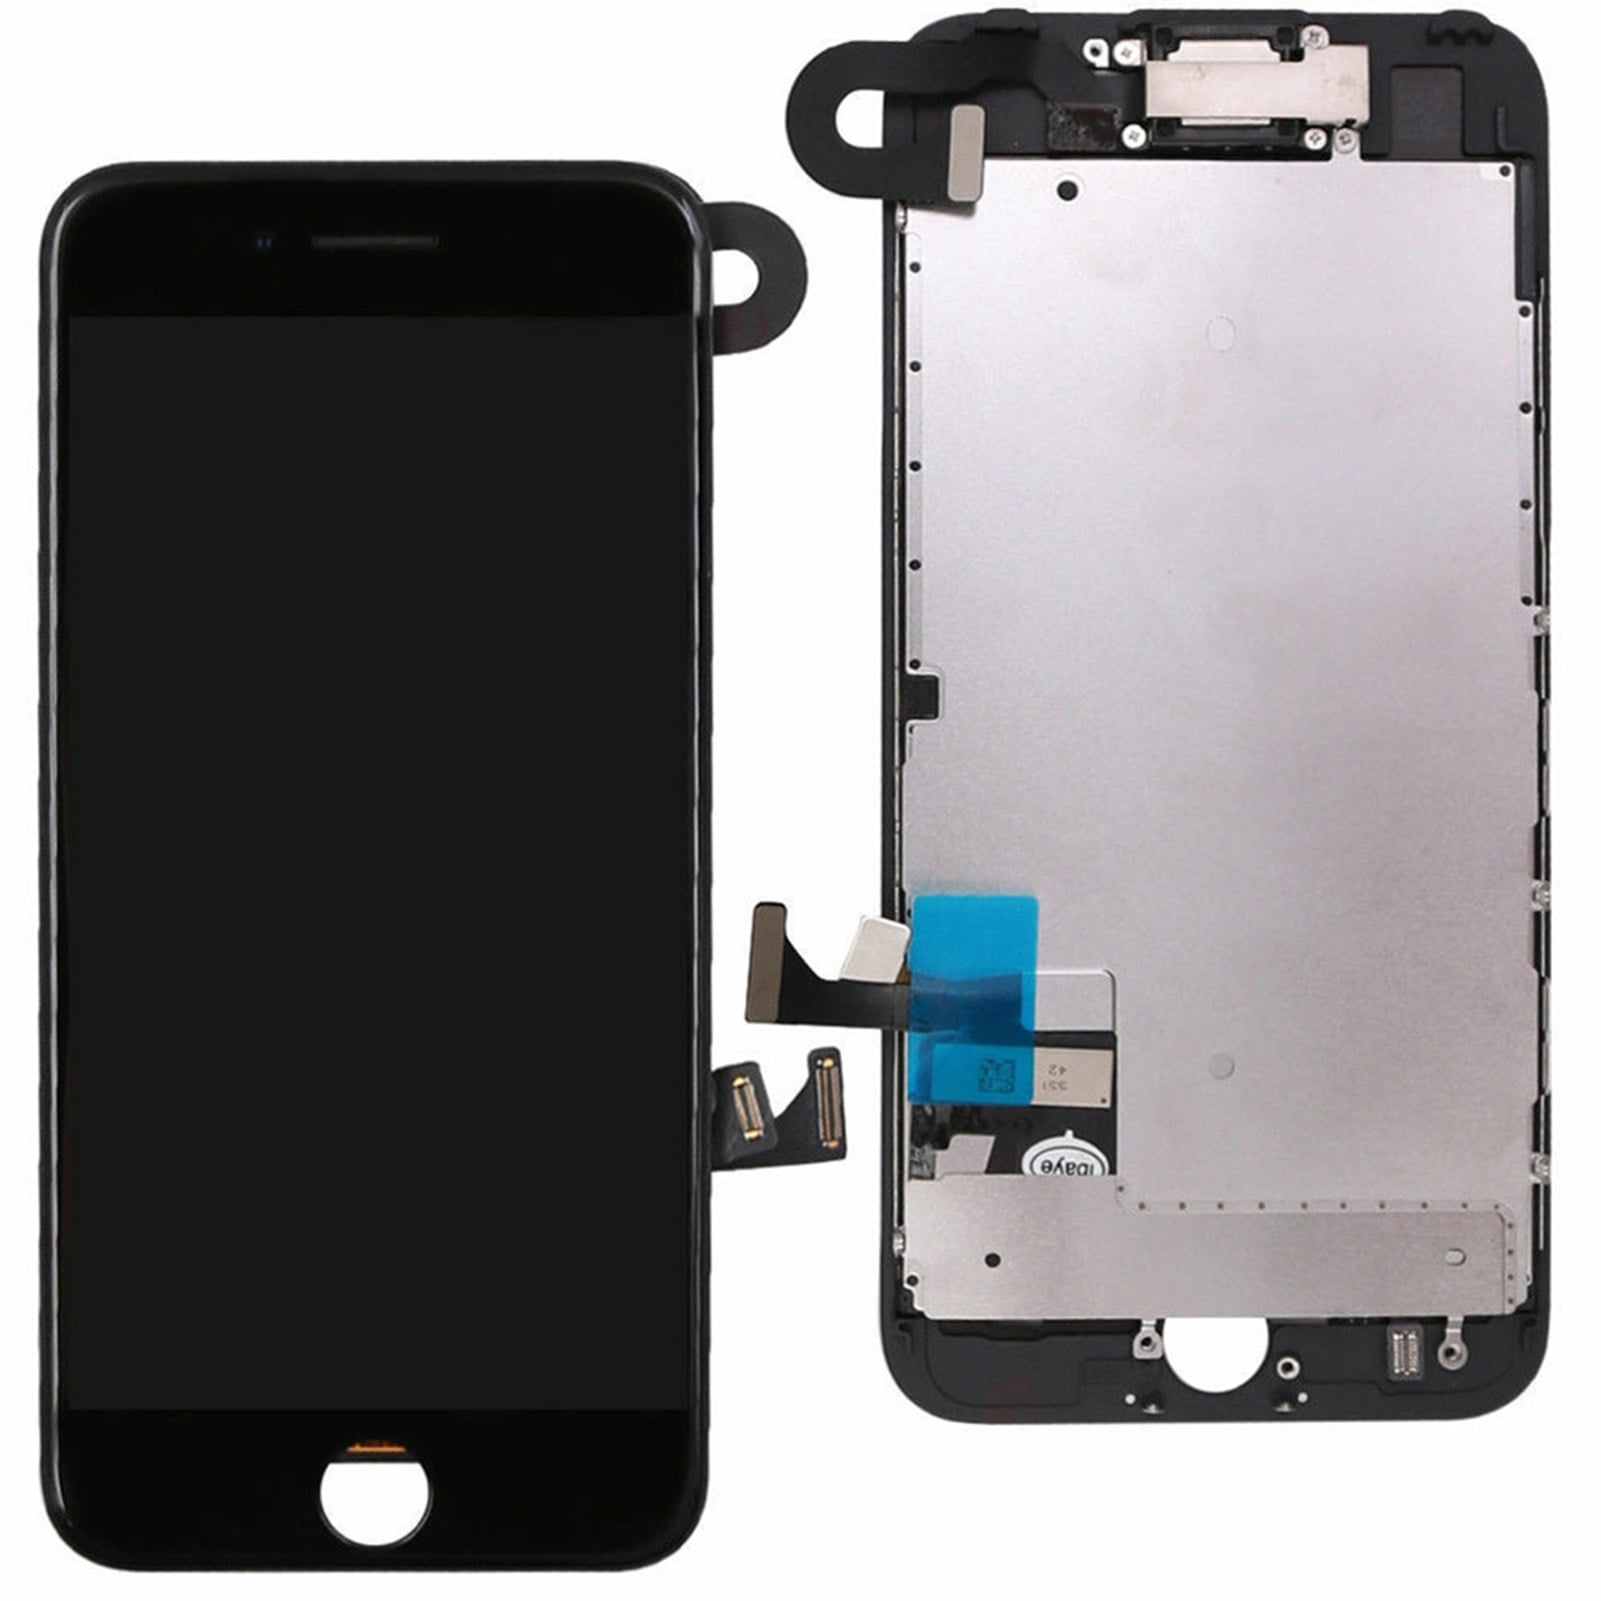 Permanecer de pié Prevalecer postre Welling Replacement LCD Display Touch Screen Digitizer with Tool for iPhone  6 5S 6S Plus - Walmart.com